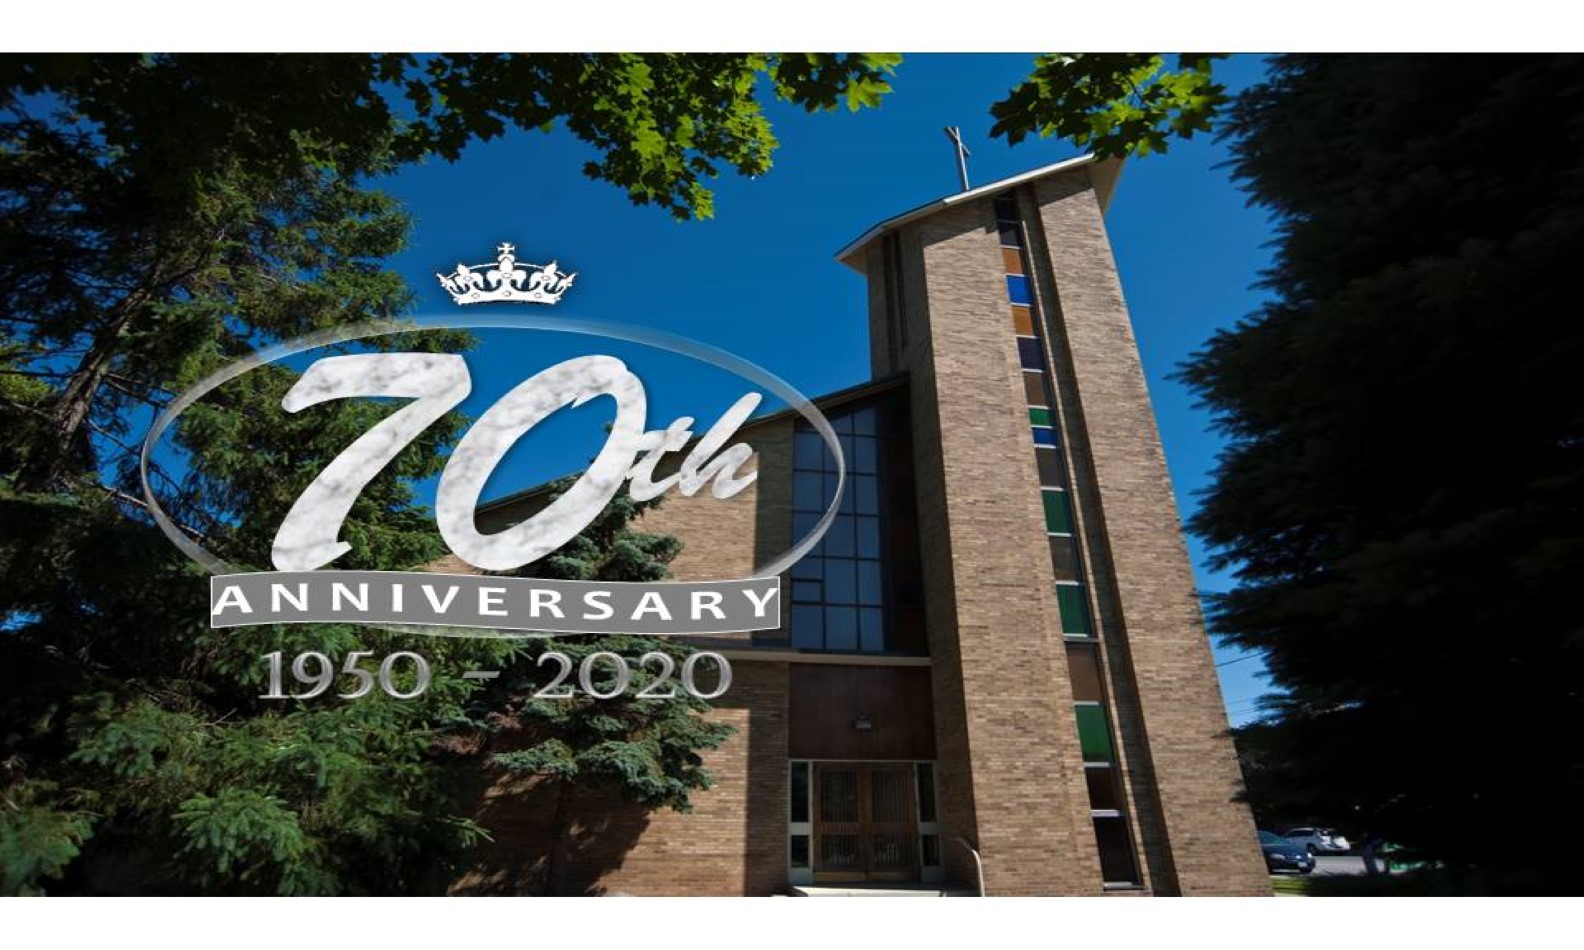 70th Anniversary with the church building background